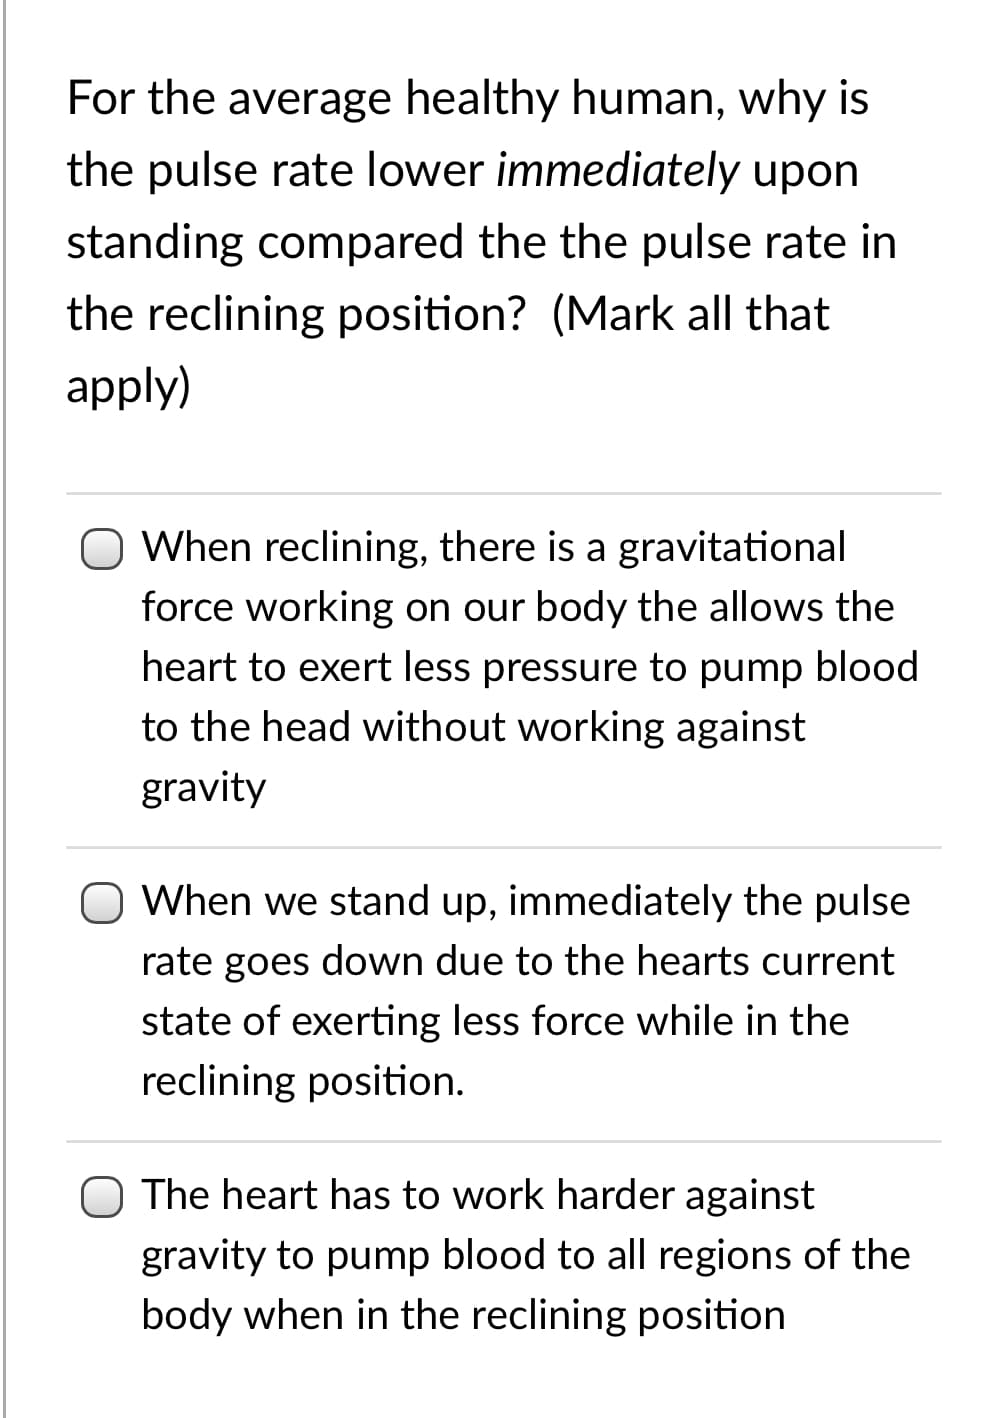 For the average healthy human, why is
the pulse rate lower immediately upon
standing compared the the pulse rate in
the reclining position? (Mark all that
apply)
When reclining, there is a gravitational
force working on our body the allows the
heart to exert less pressure to pump blood
to the head without working against
gravity
O When we stand up, immediately the pulse
rate goes down due to the hearts current
state of exerting less force while in the
reclining position.
O The heart has to work harder against
gravity to pump blood to all regions of the
body when in the reclining position
